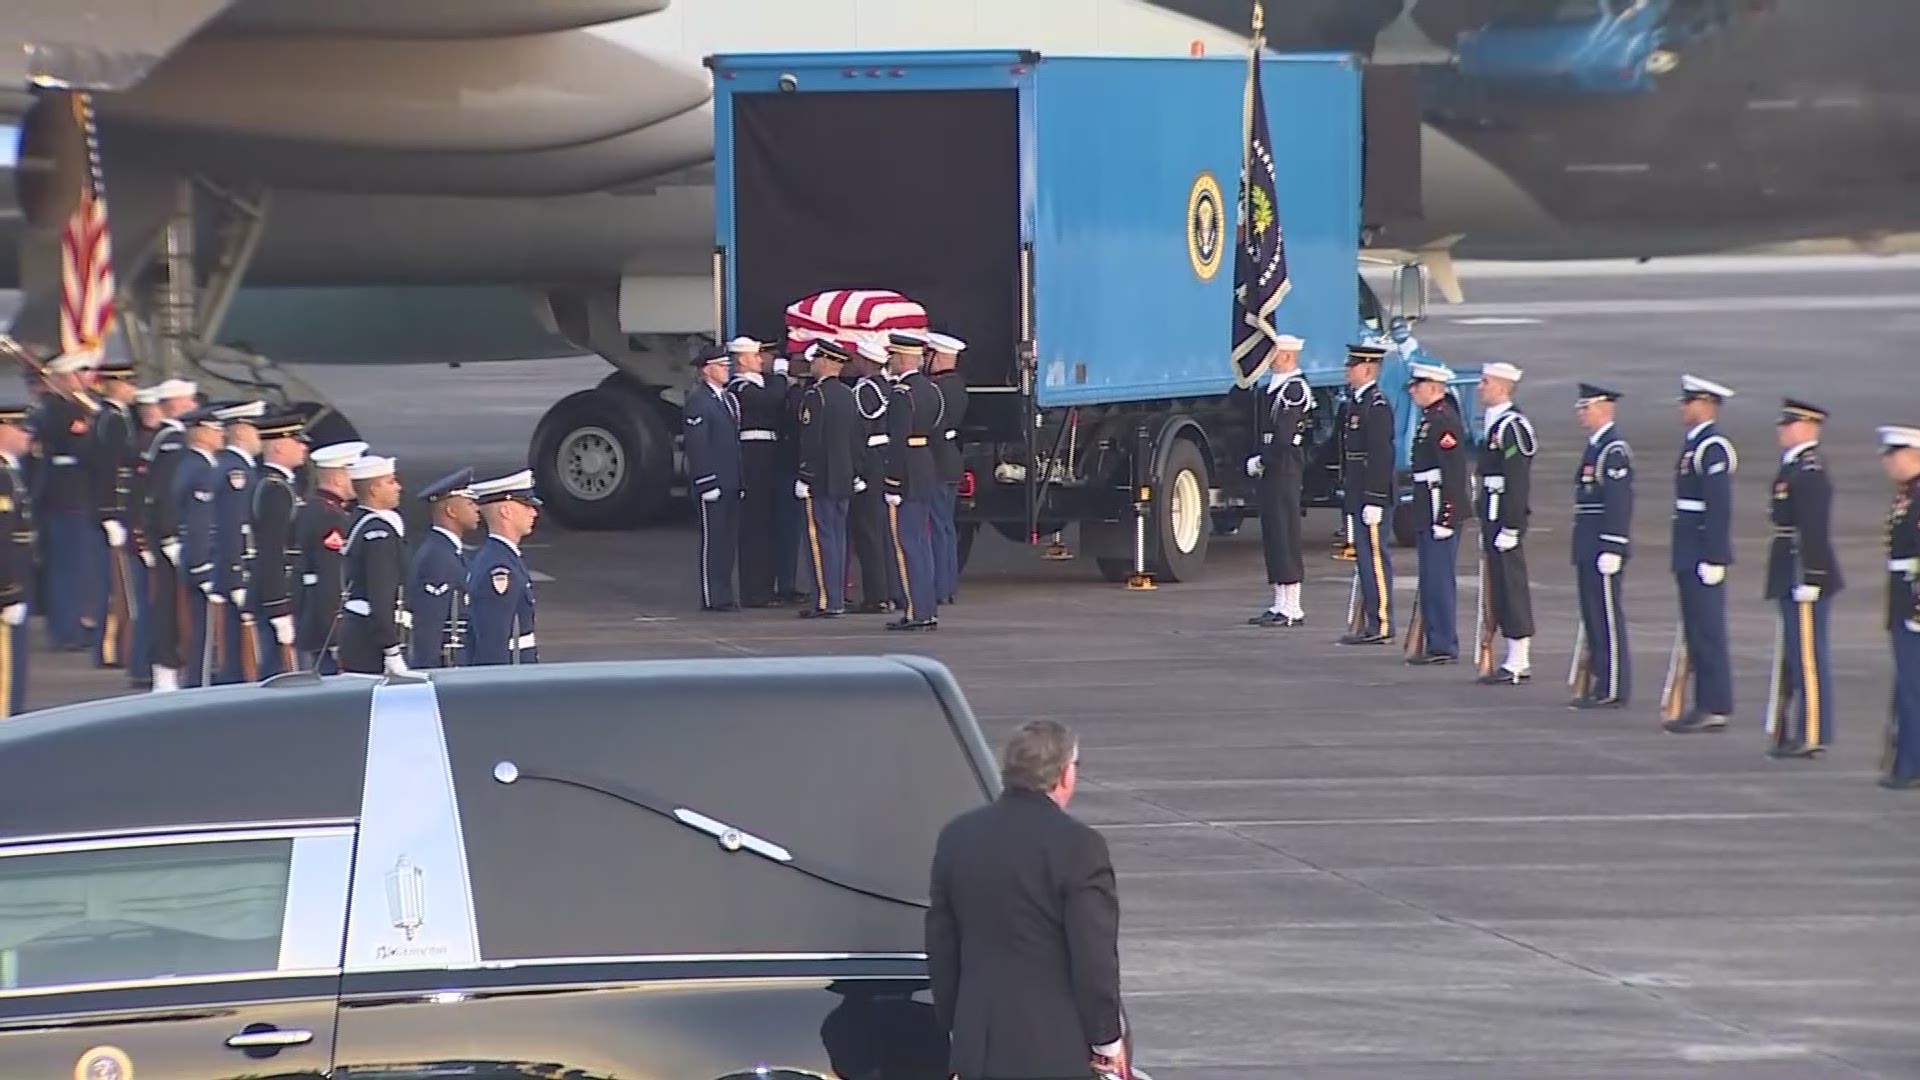 The 41st President and SAM1 arrived in Houston around 5 p.m. Wednesday on Bush's final journey home.